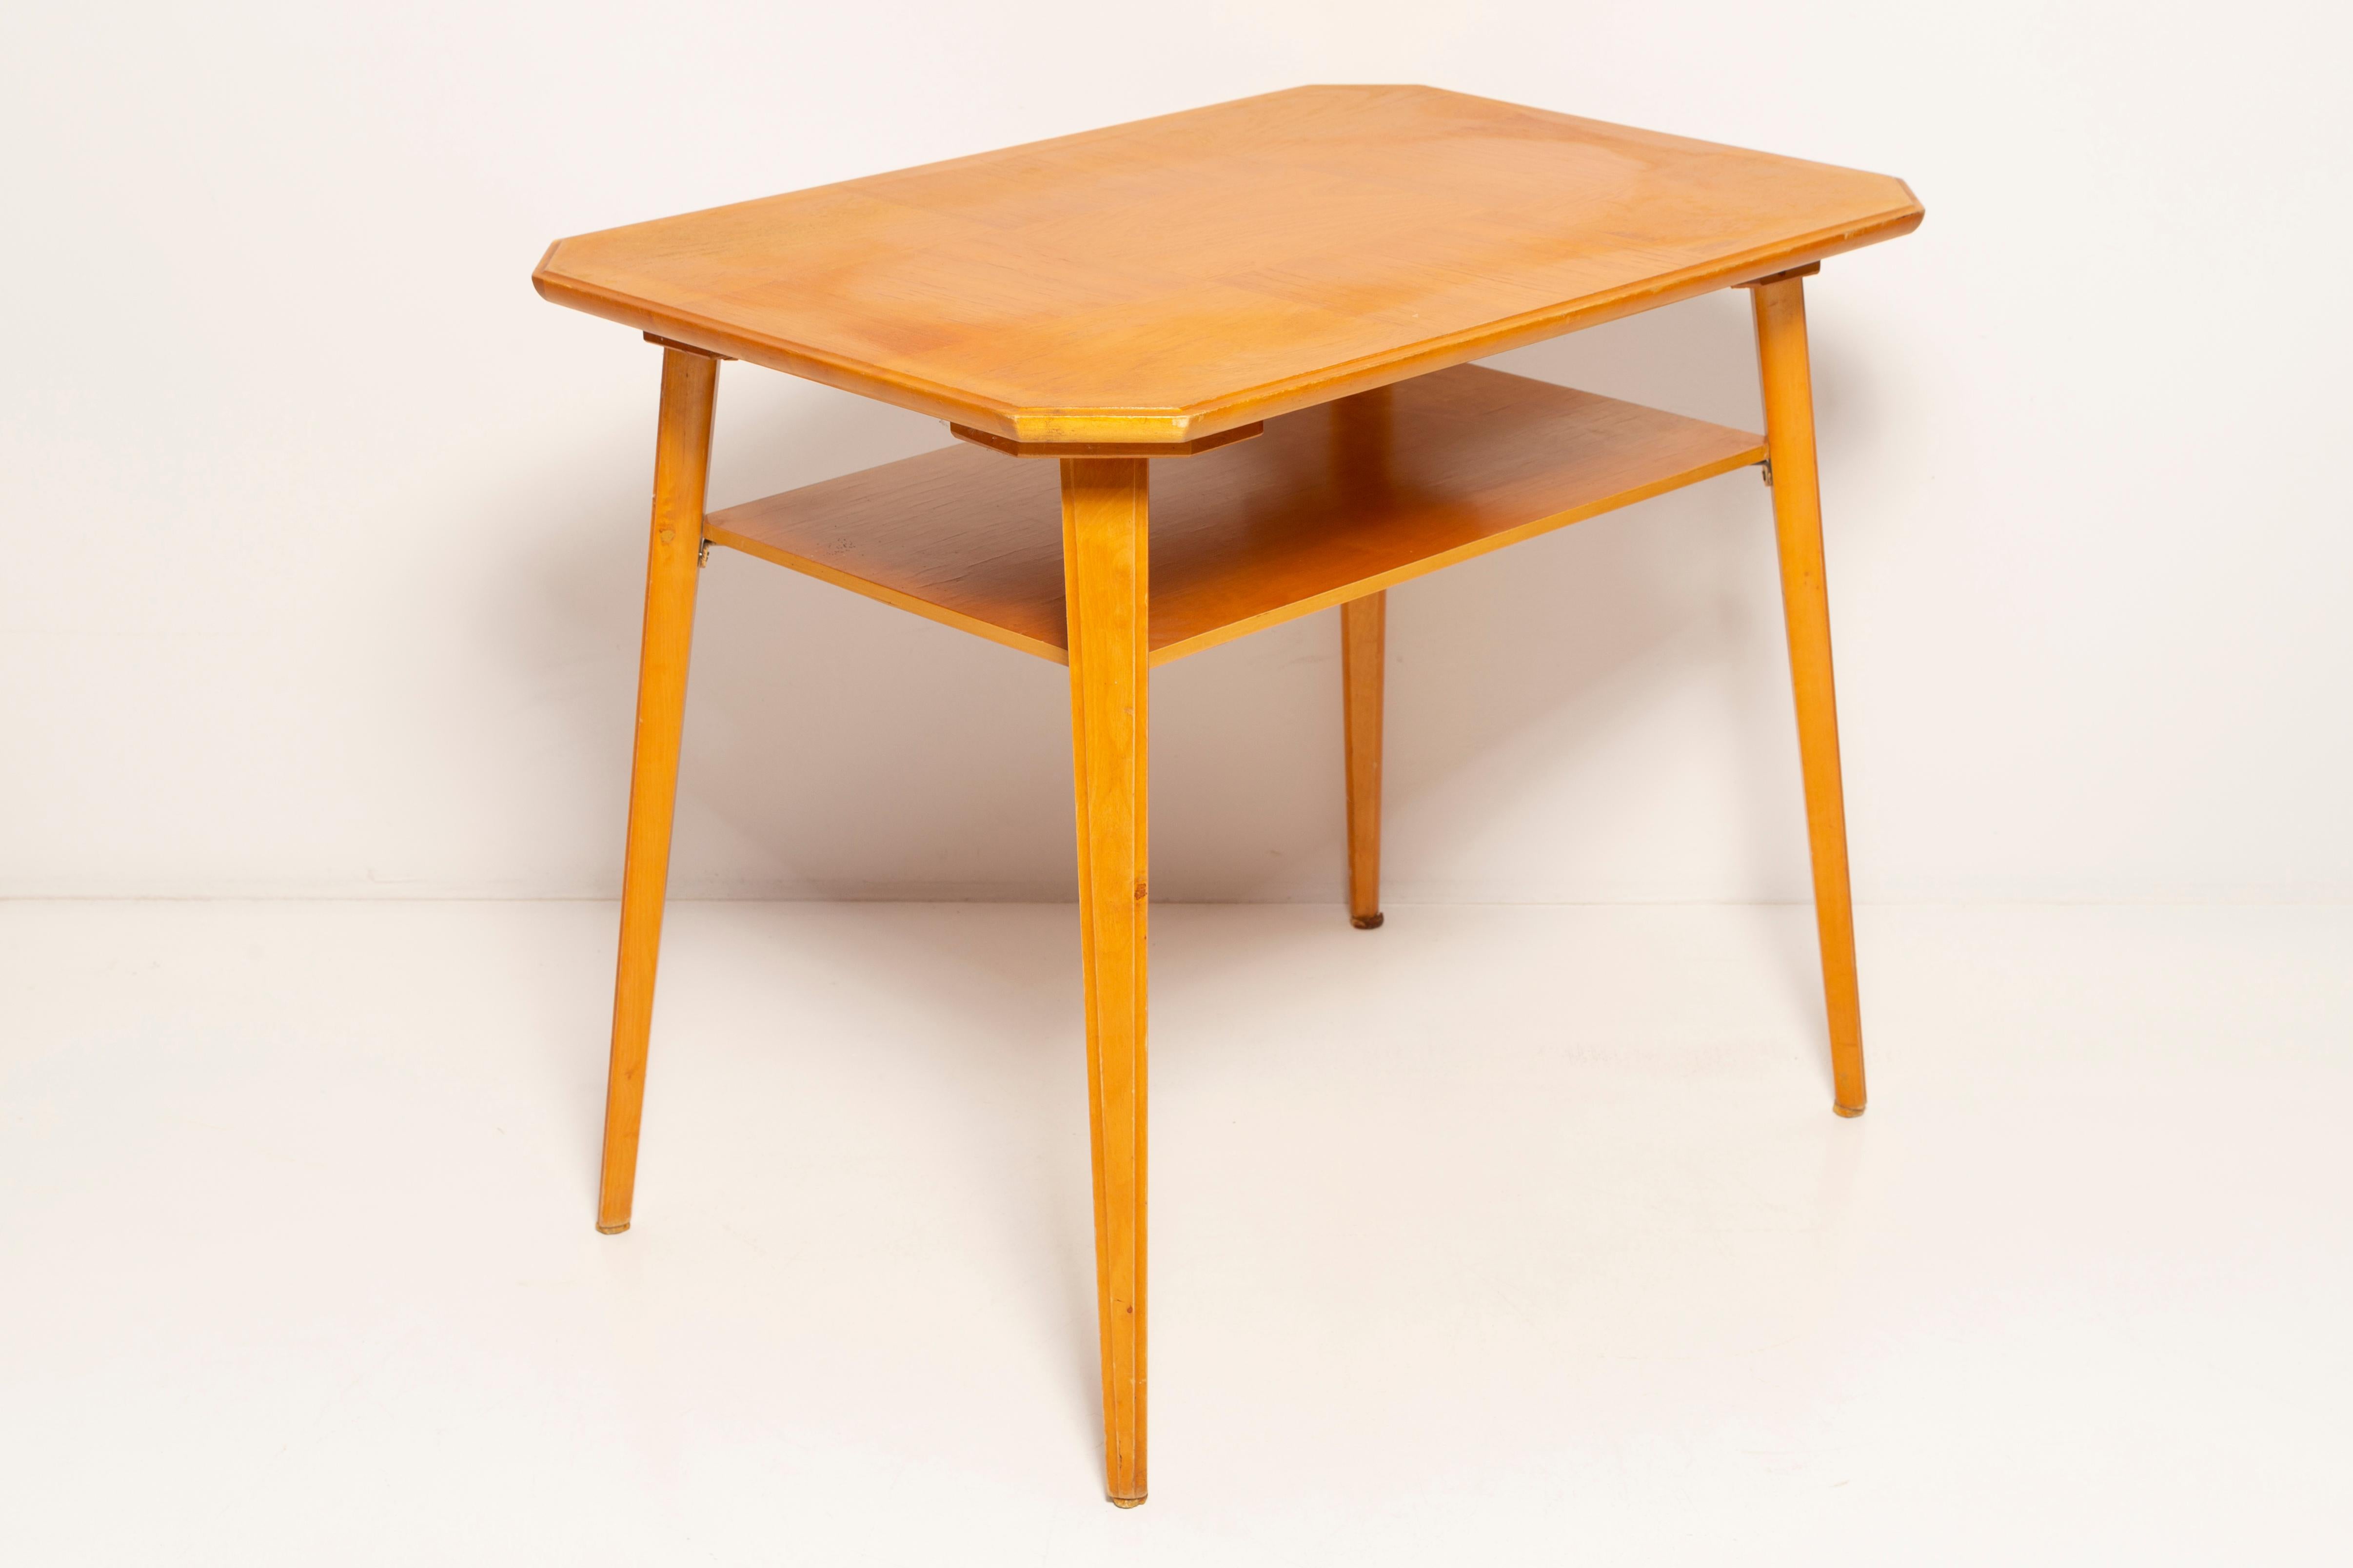 Mid-Century Modern Coffee Table, Light Wood, Europe, 1960s For Sale 1